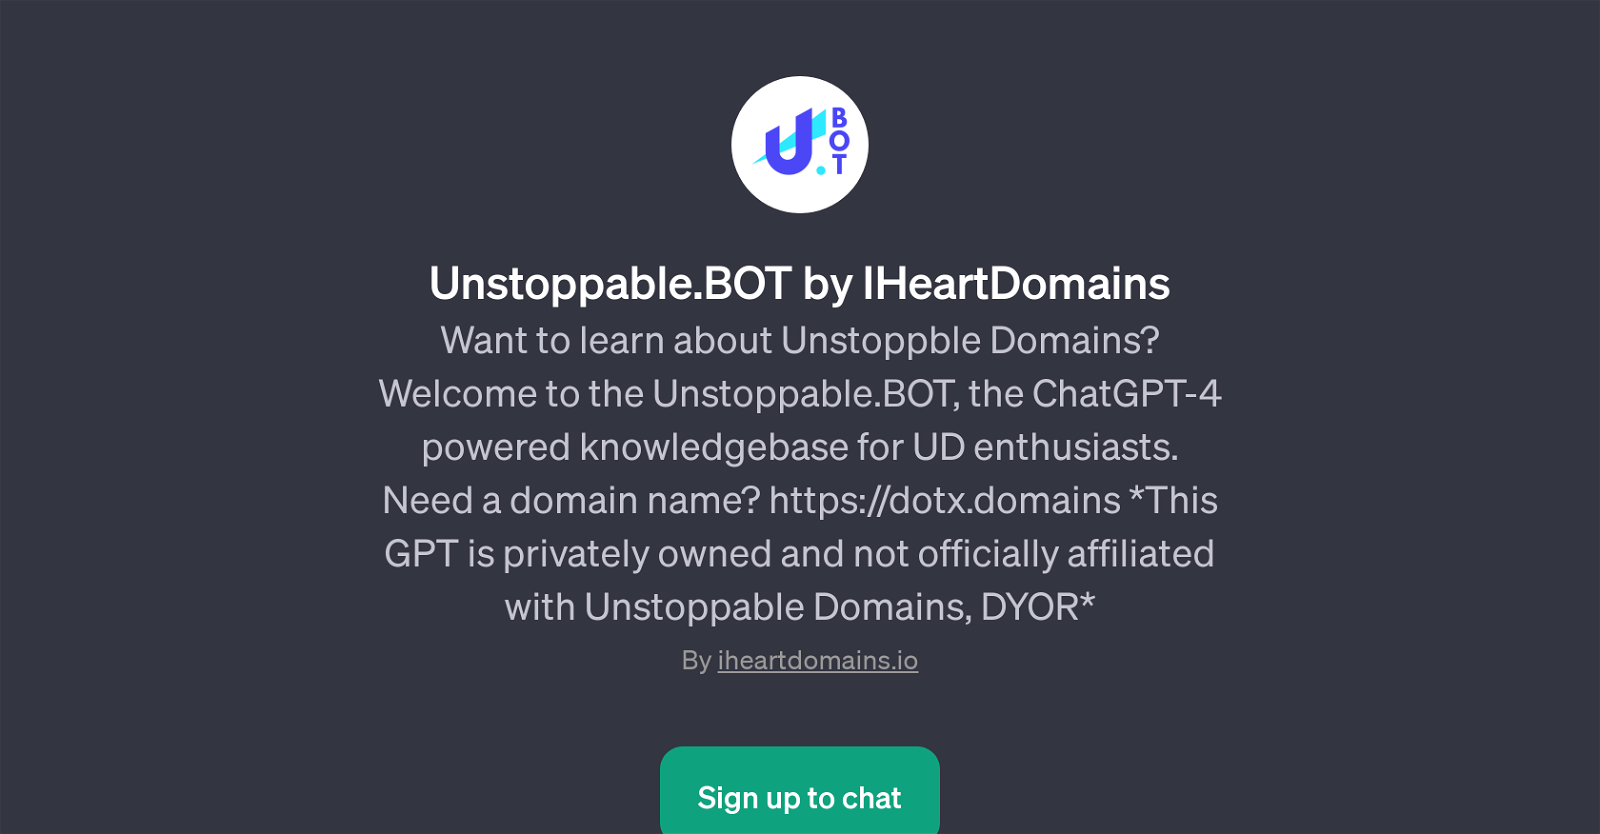 Unstoppable.BOT by IHeartDomains website